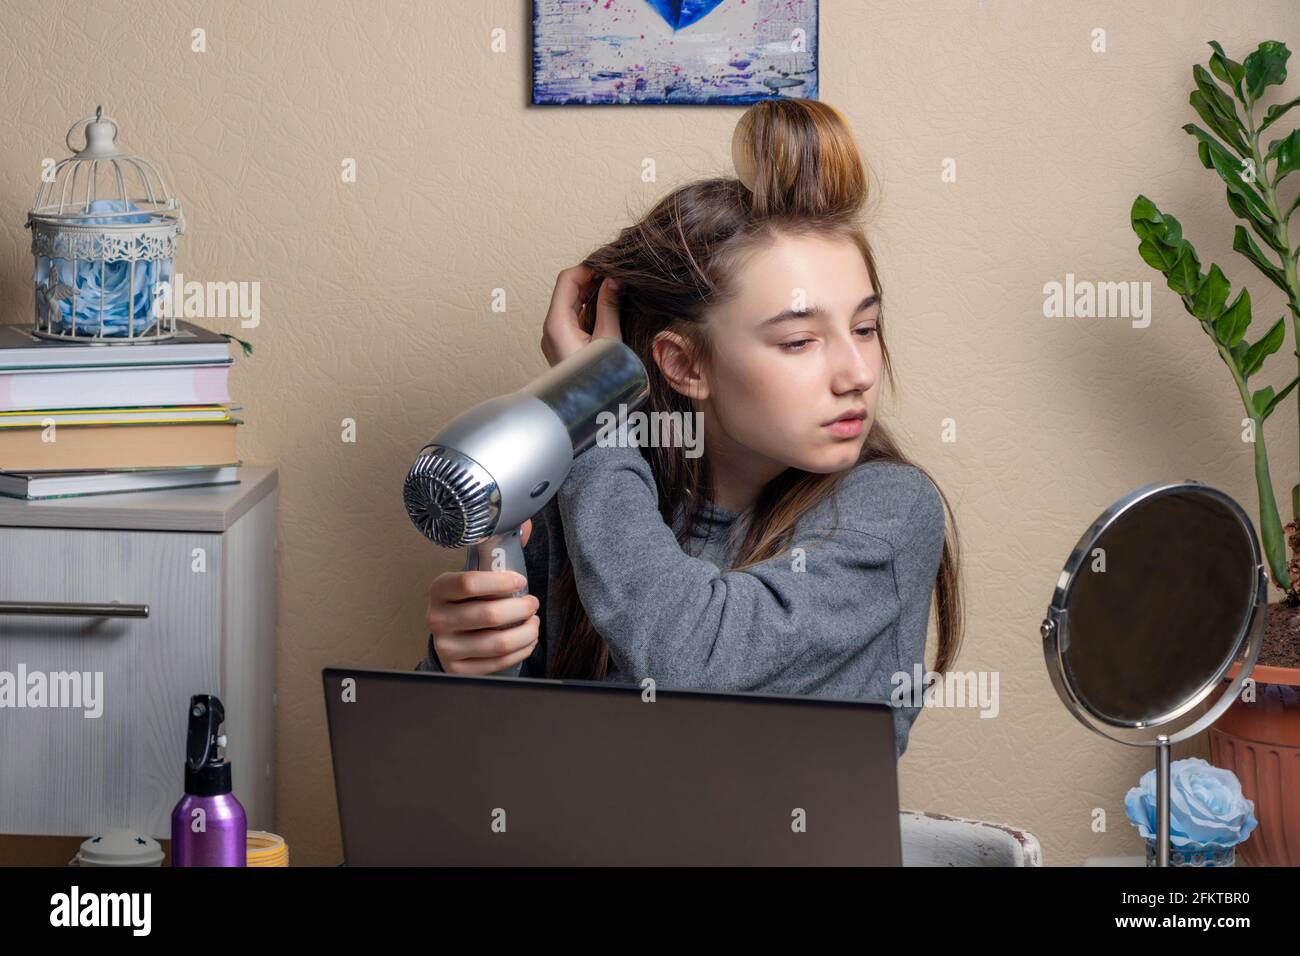 teenage girl with curlers and a hairdryer looks at the laptop screen. beautiful teenage girl doing her hair in front of laptops. Online beauty concept Stock Photo